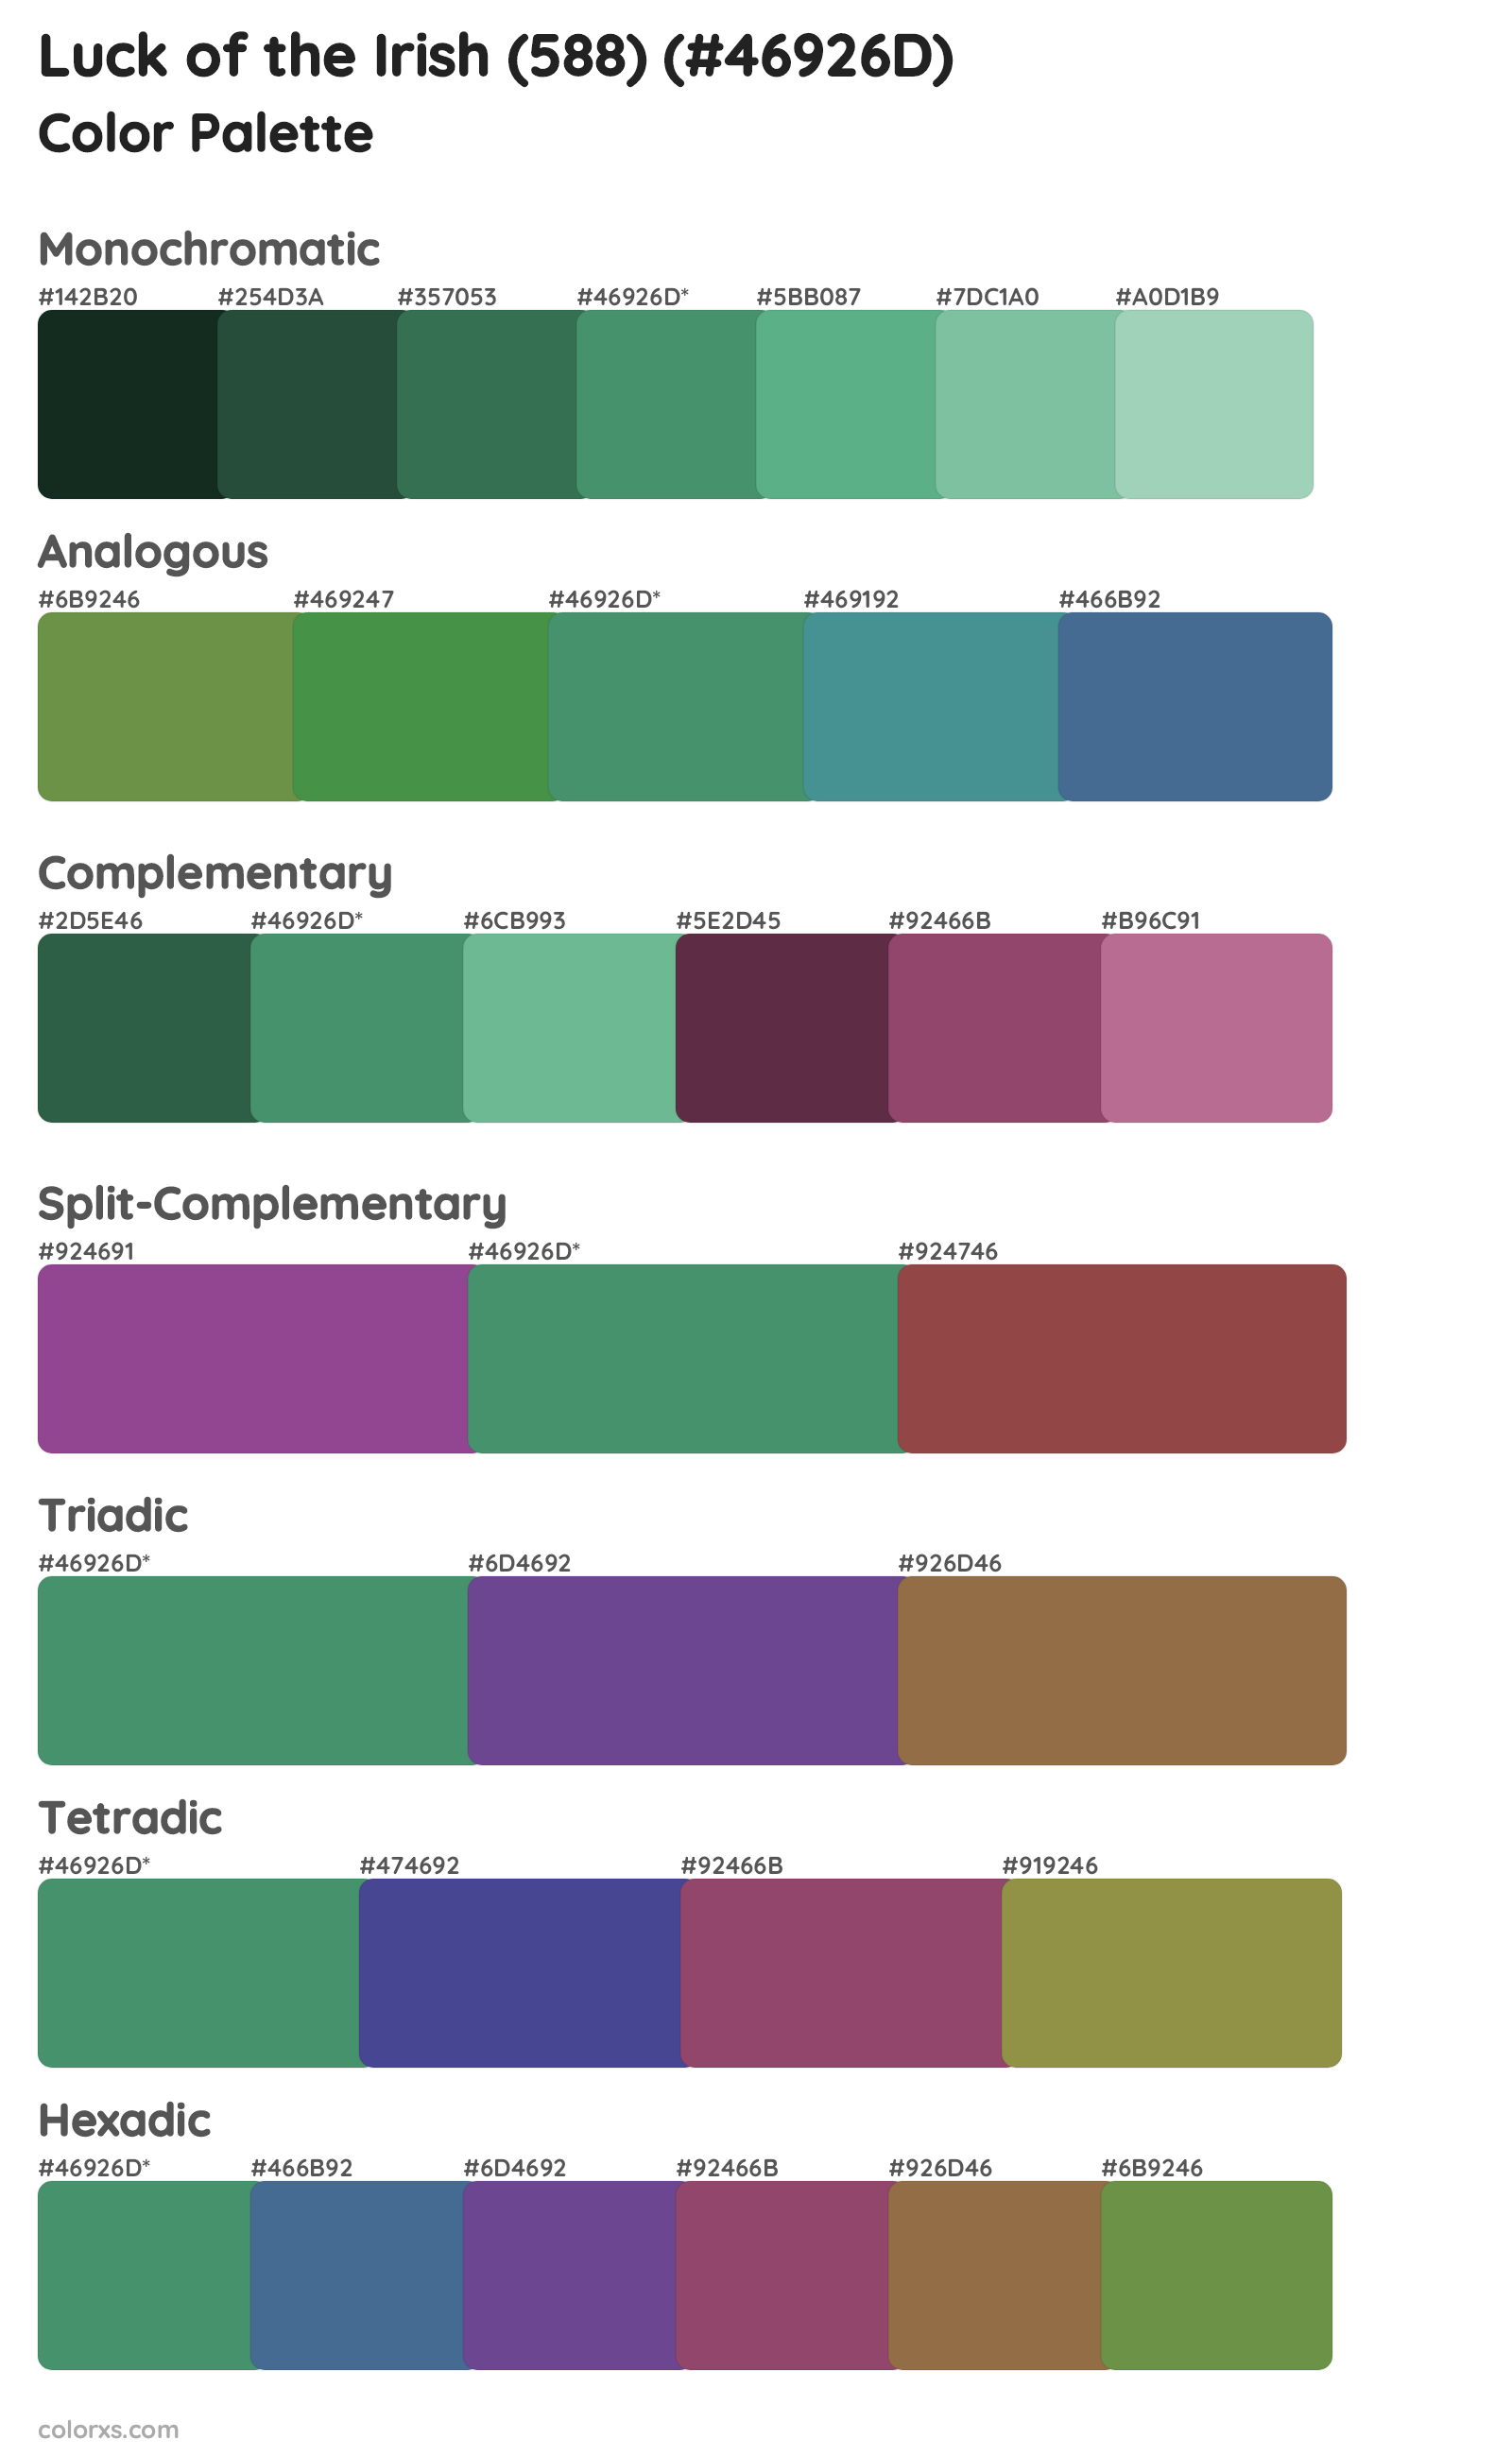 Luck of the Irish (588) Color Scheme Palettes